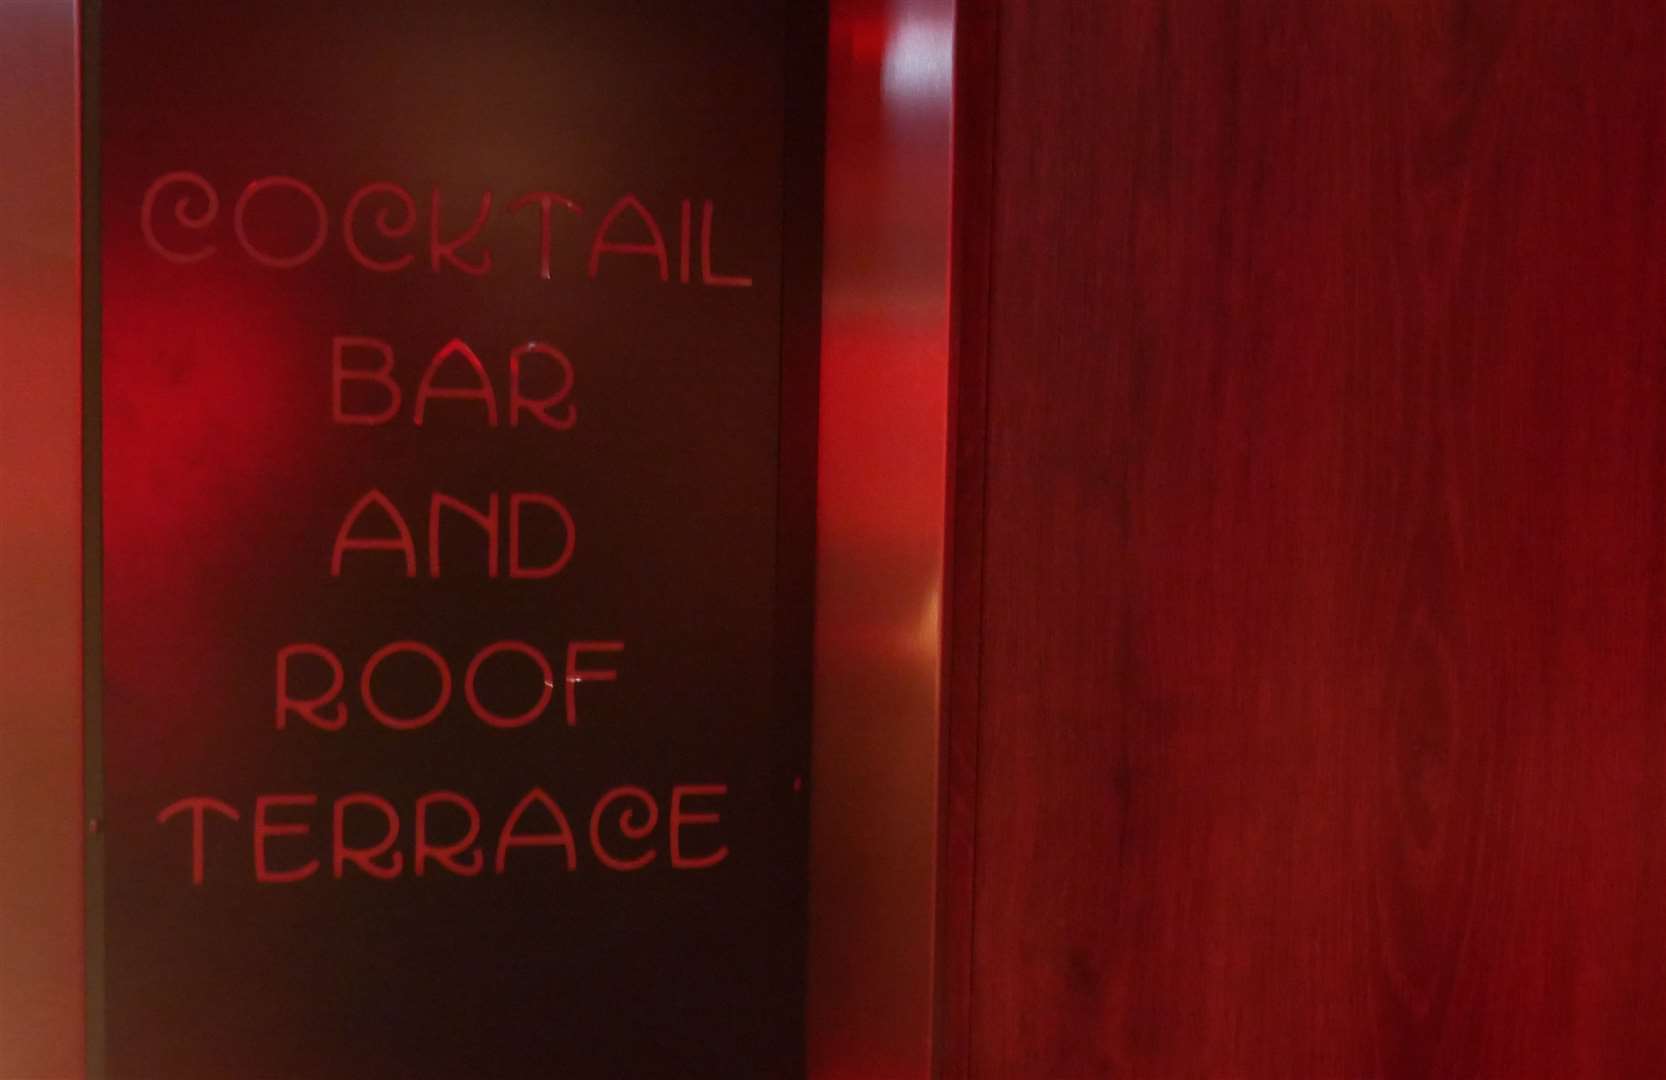 Sign to the cocktail bar and roof terrace